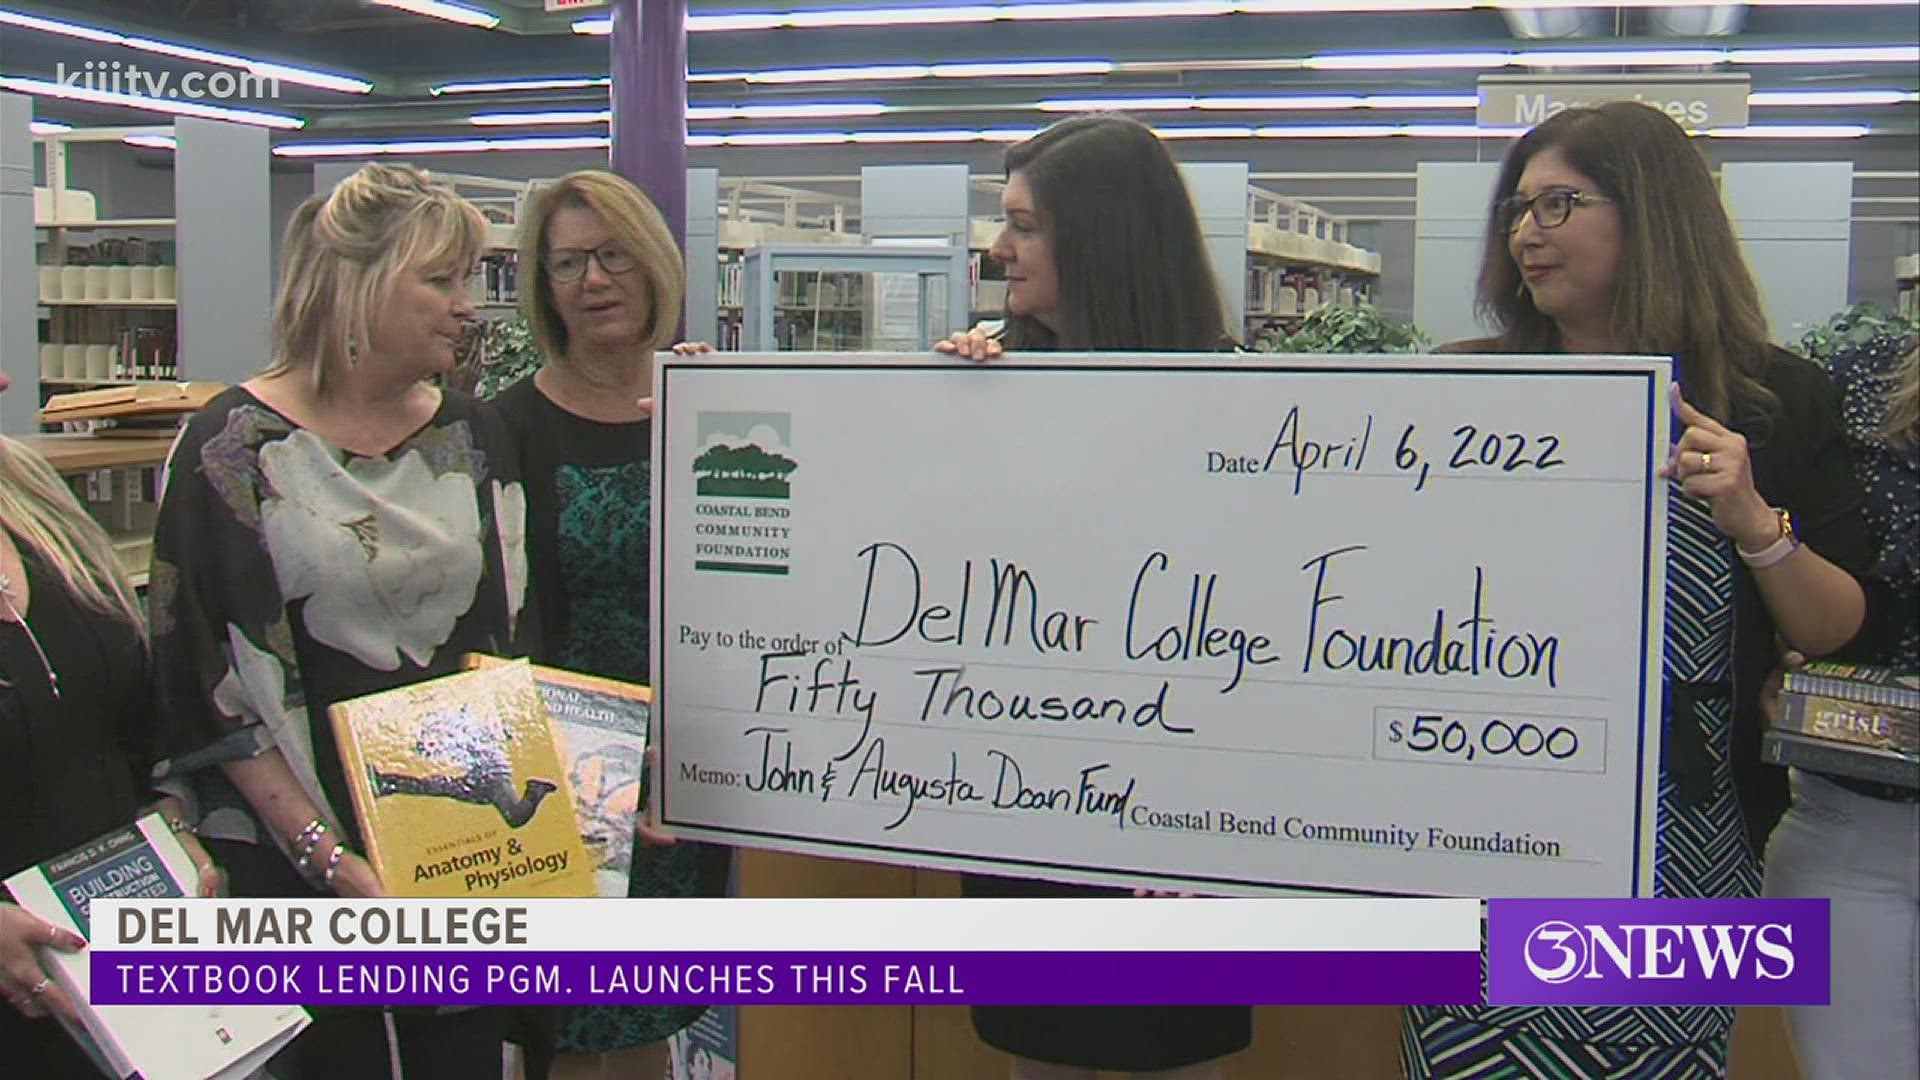 The foundation is donating $50,000 to Del Mar College for its program which allows students to check out textbooks free of charge.